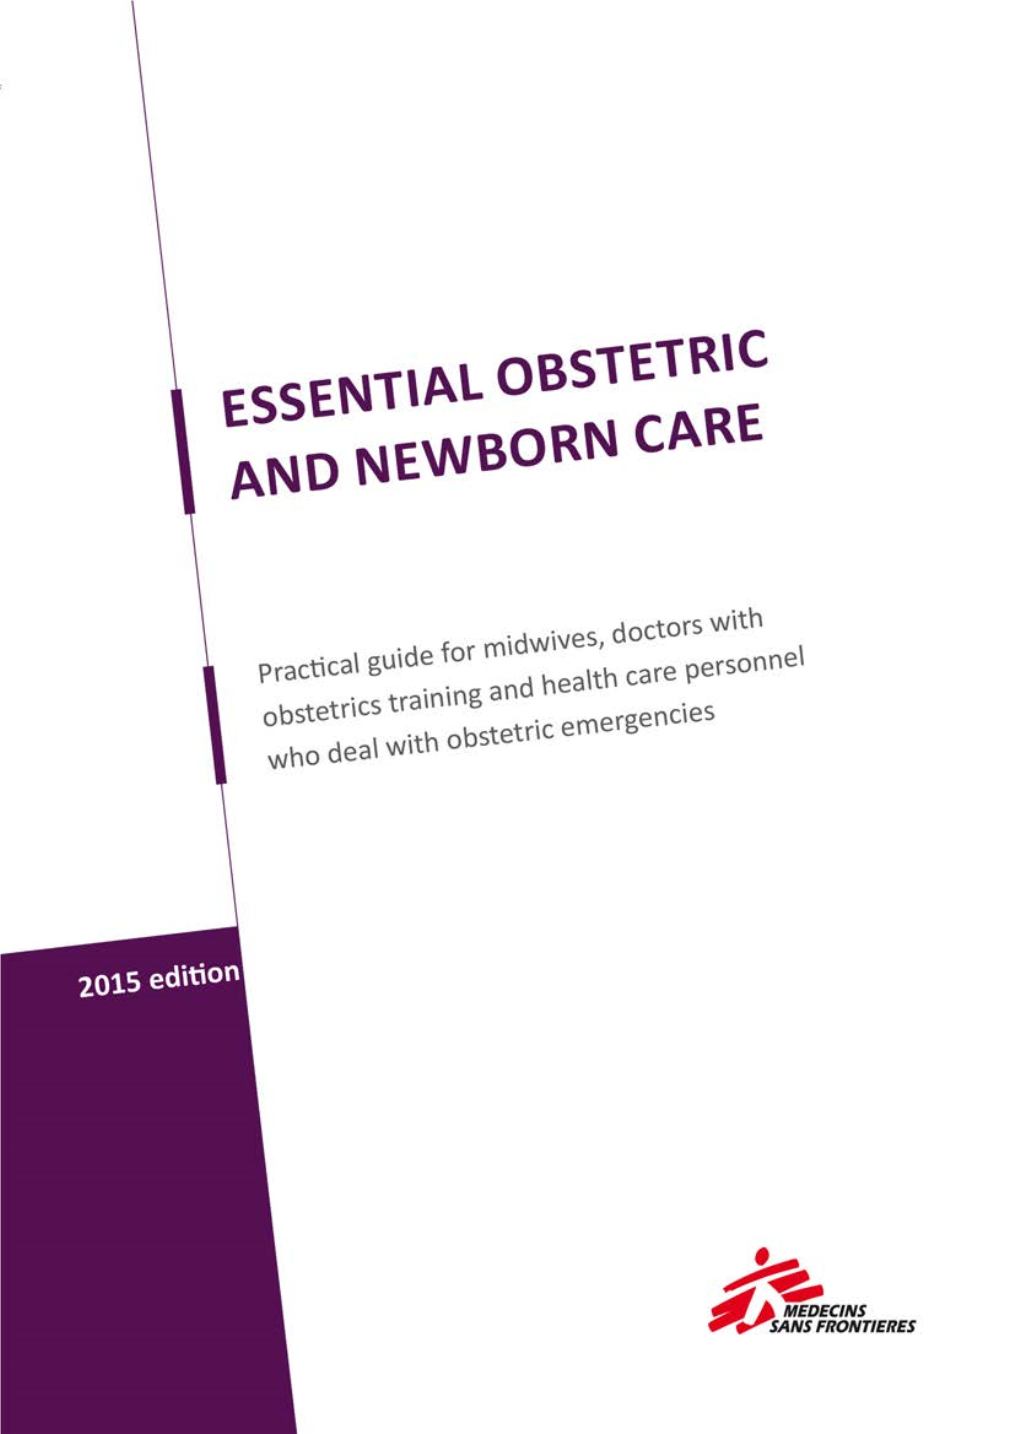 Essential Obstetric and Newborn Care, 2015 Edition